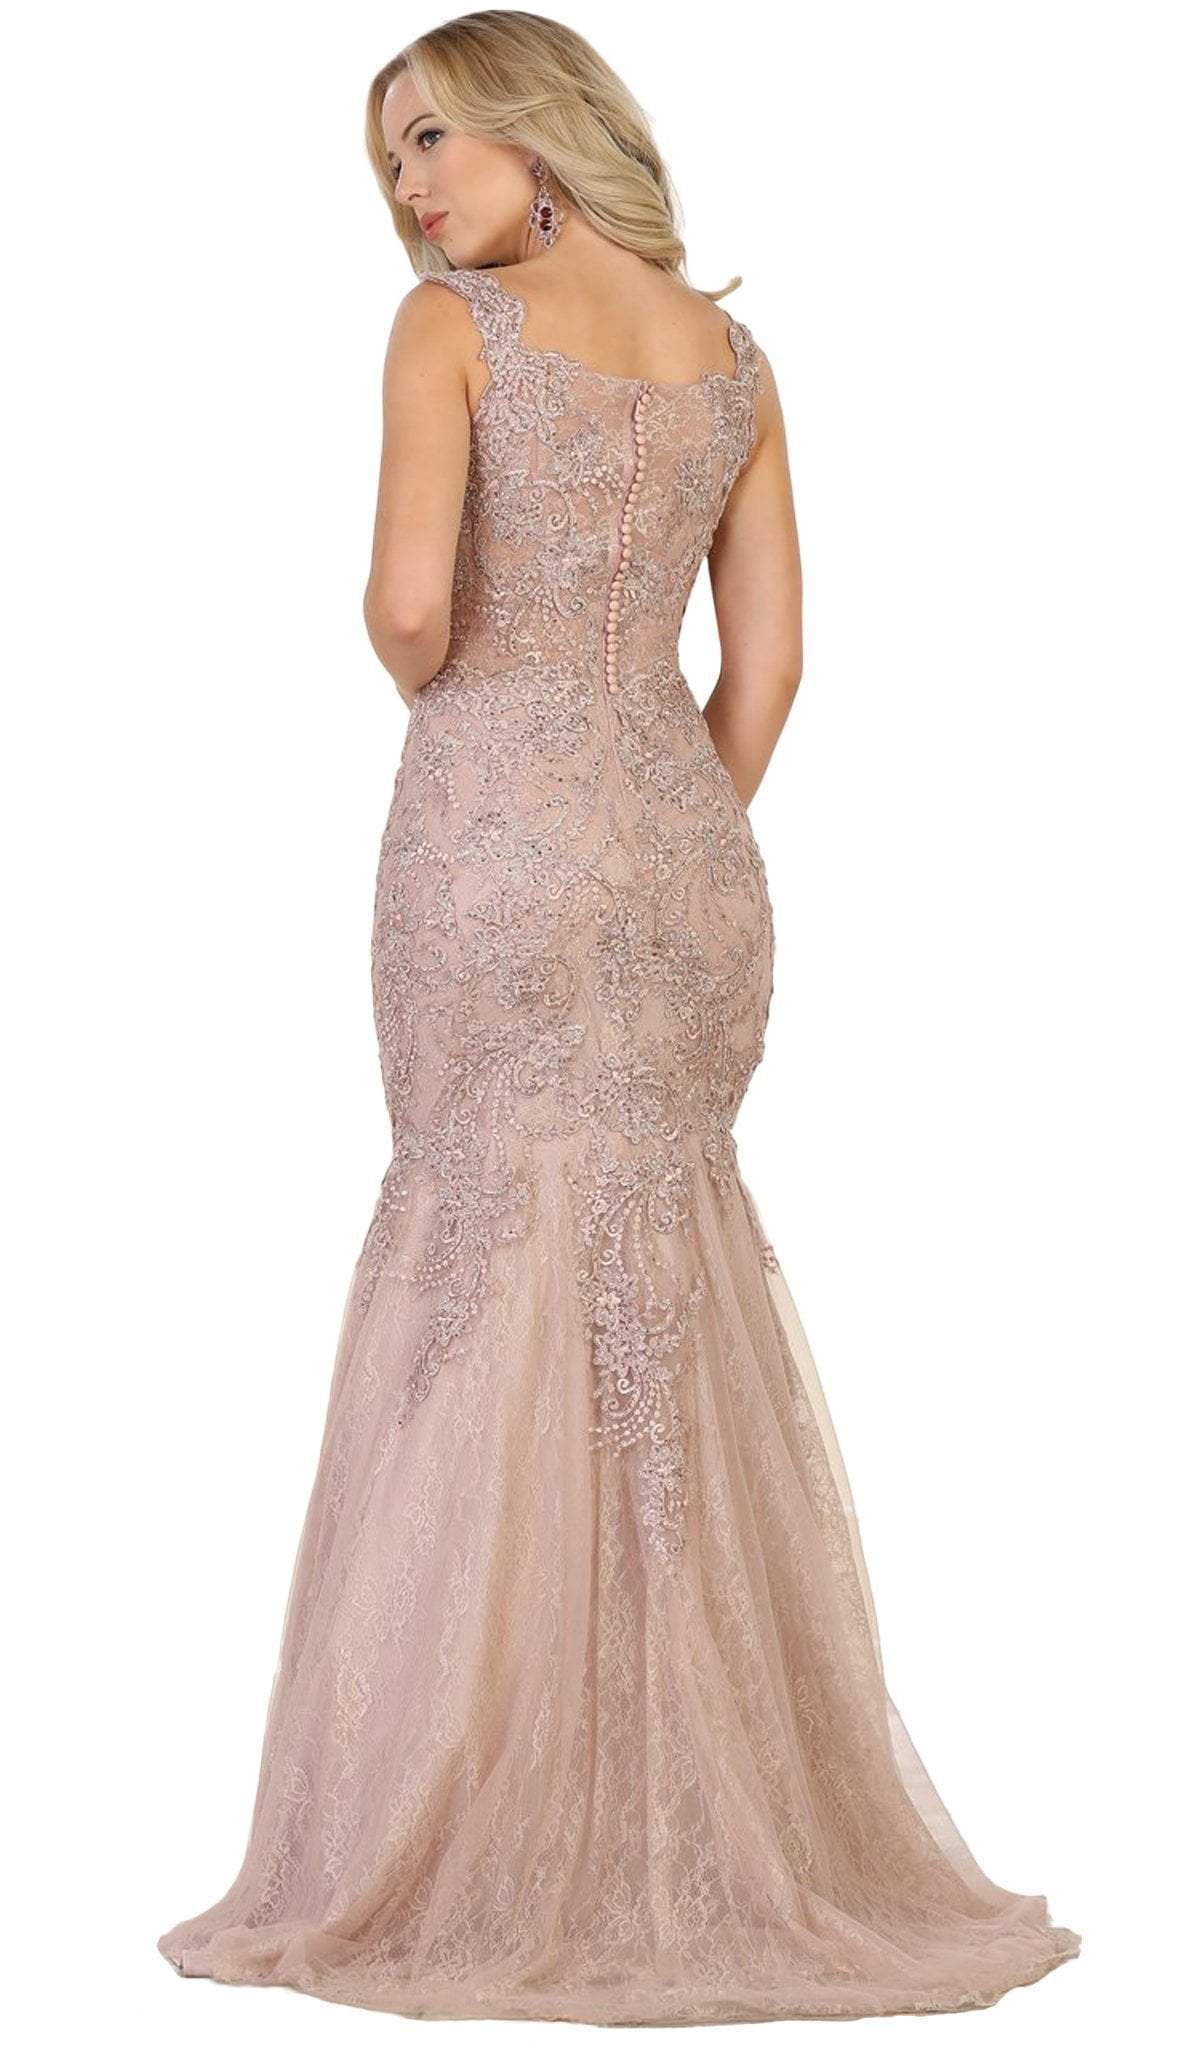 May Queen - RQ7544 Beaded Lace Square Neck Trumpet Evening Dress Special Occasion Dress